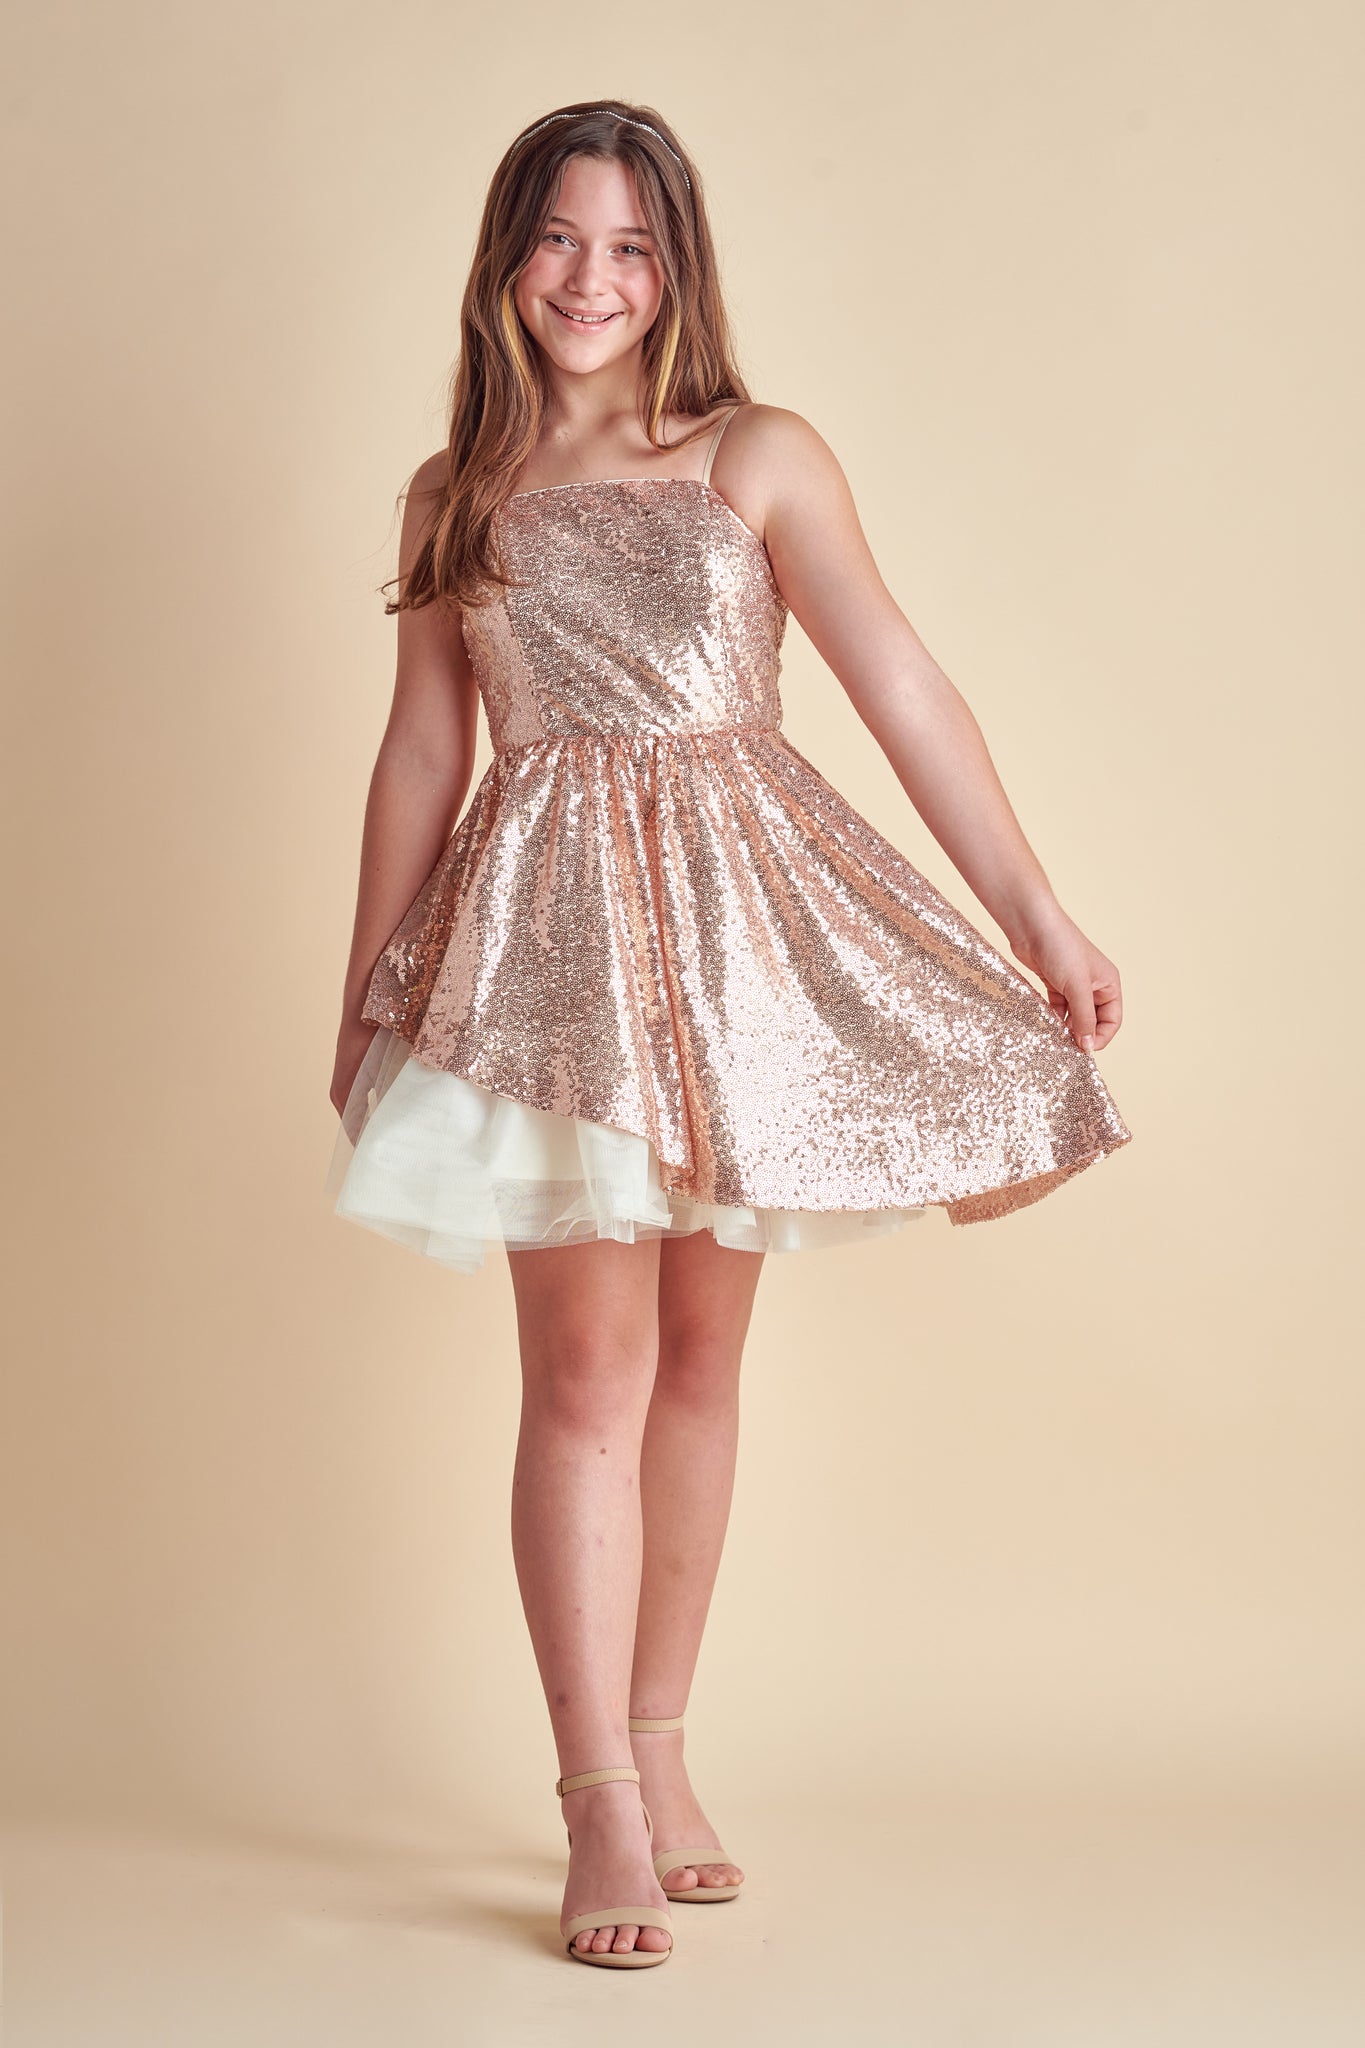 The peek-a-boo sequin dress features all over stretch sequin fabric with full circle skirt and asymmetrical skirt for a fun, twirl. Features a zipper back detailing and adjustable straps for comfort.